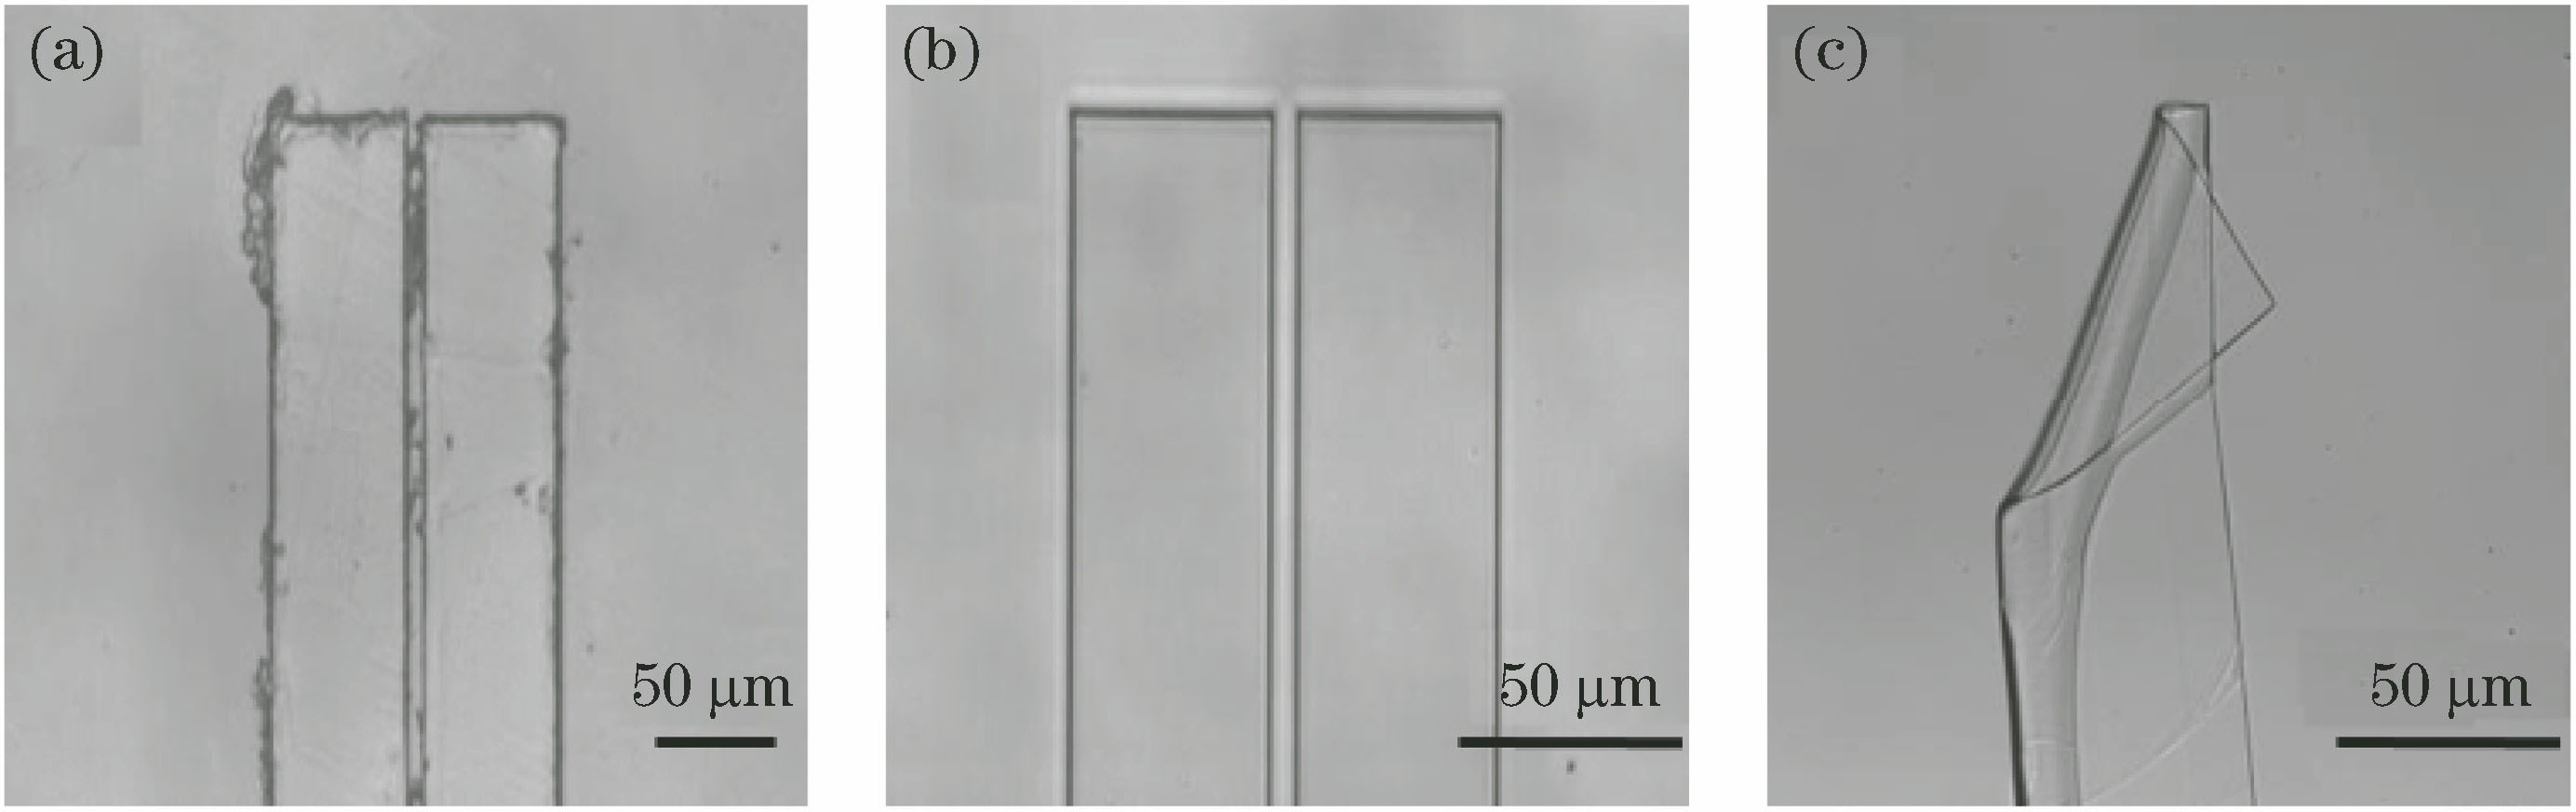 Morphologies of photoresist after different development time. (a) 25 s; (b) 30 s; (c) 35 s